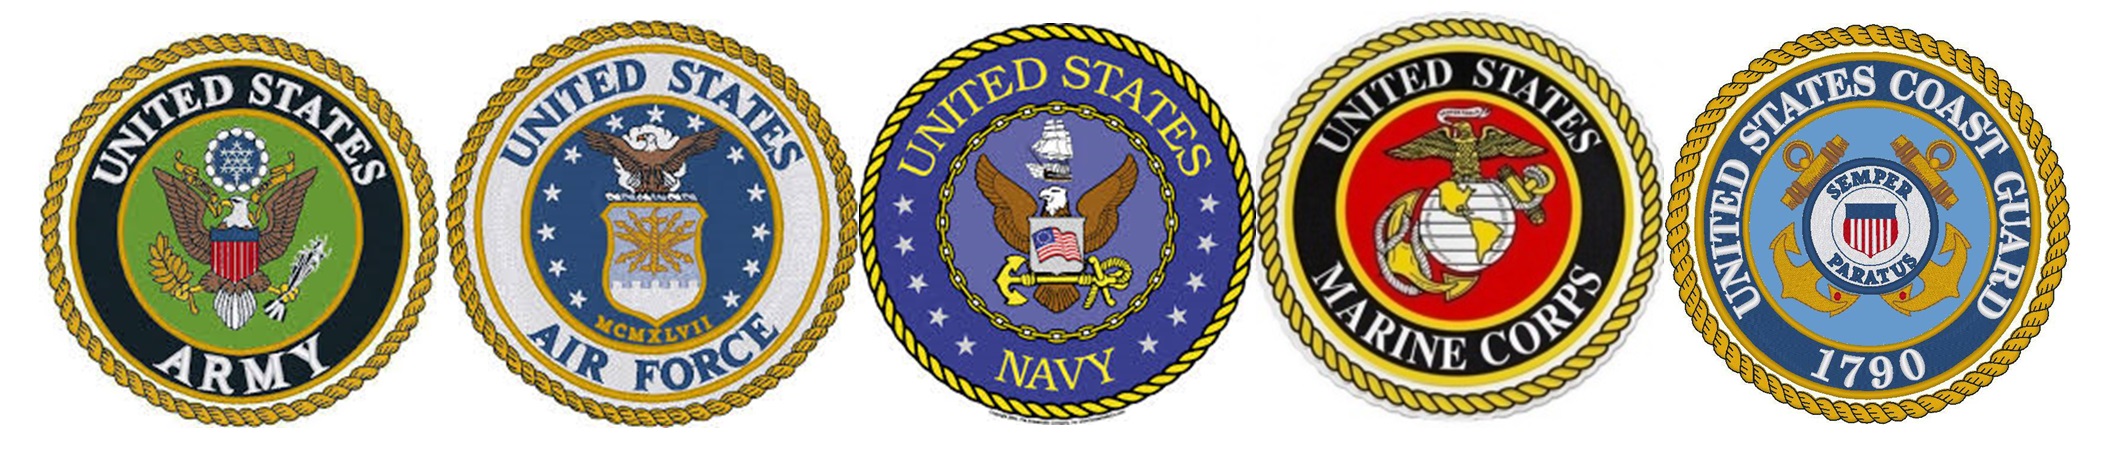 military branches clip art - photo #20